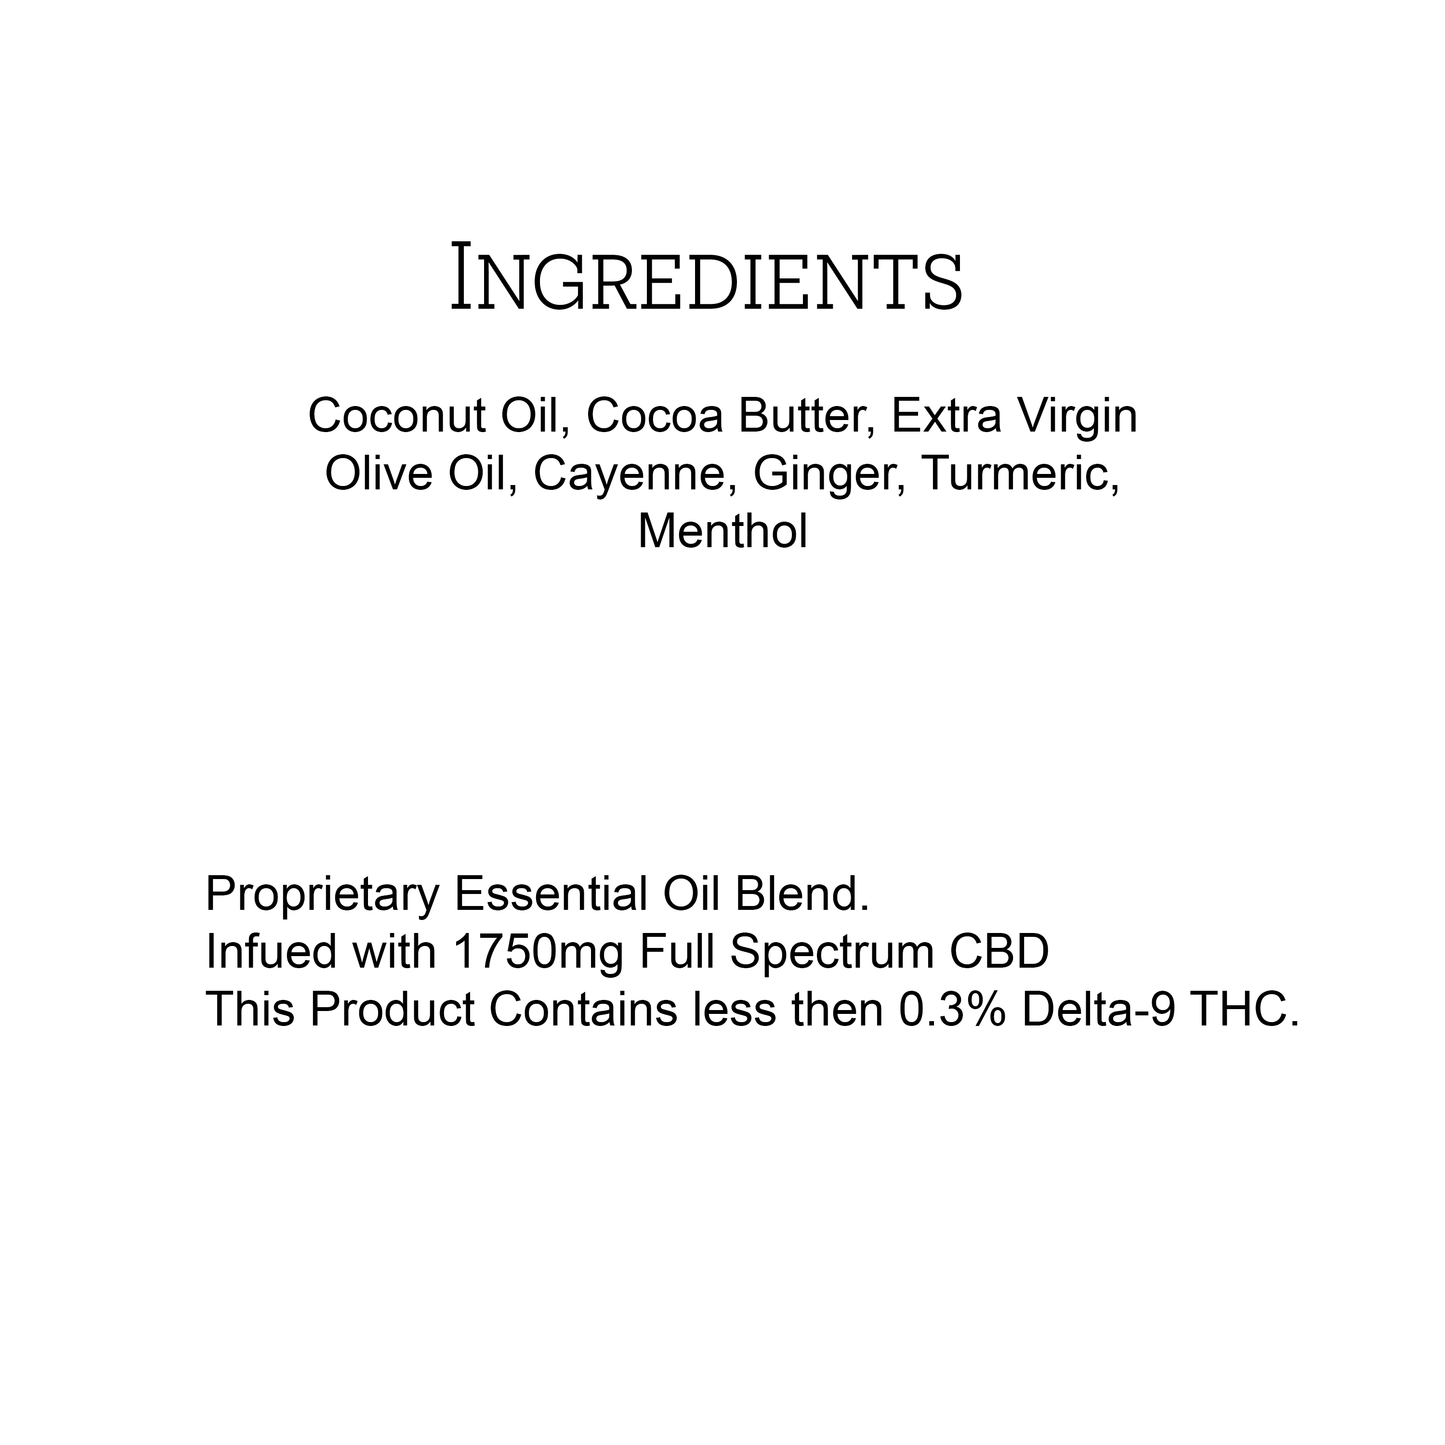 Product label of the Ingredients and Less the 0.3% Delta-9 THC Disclaimer